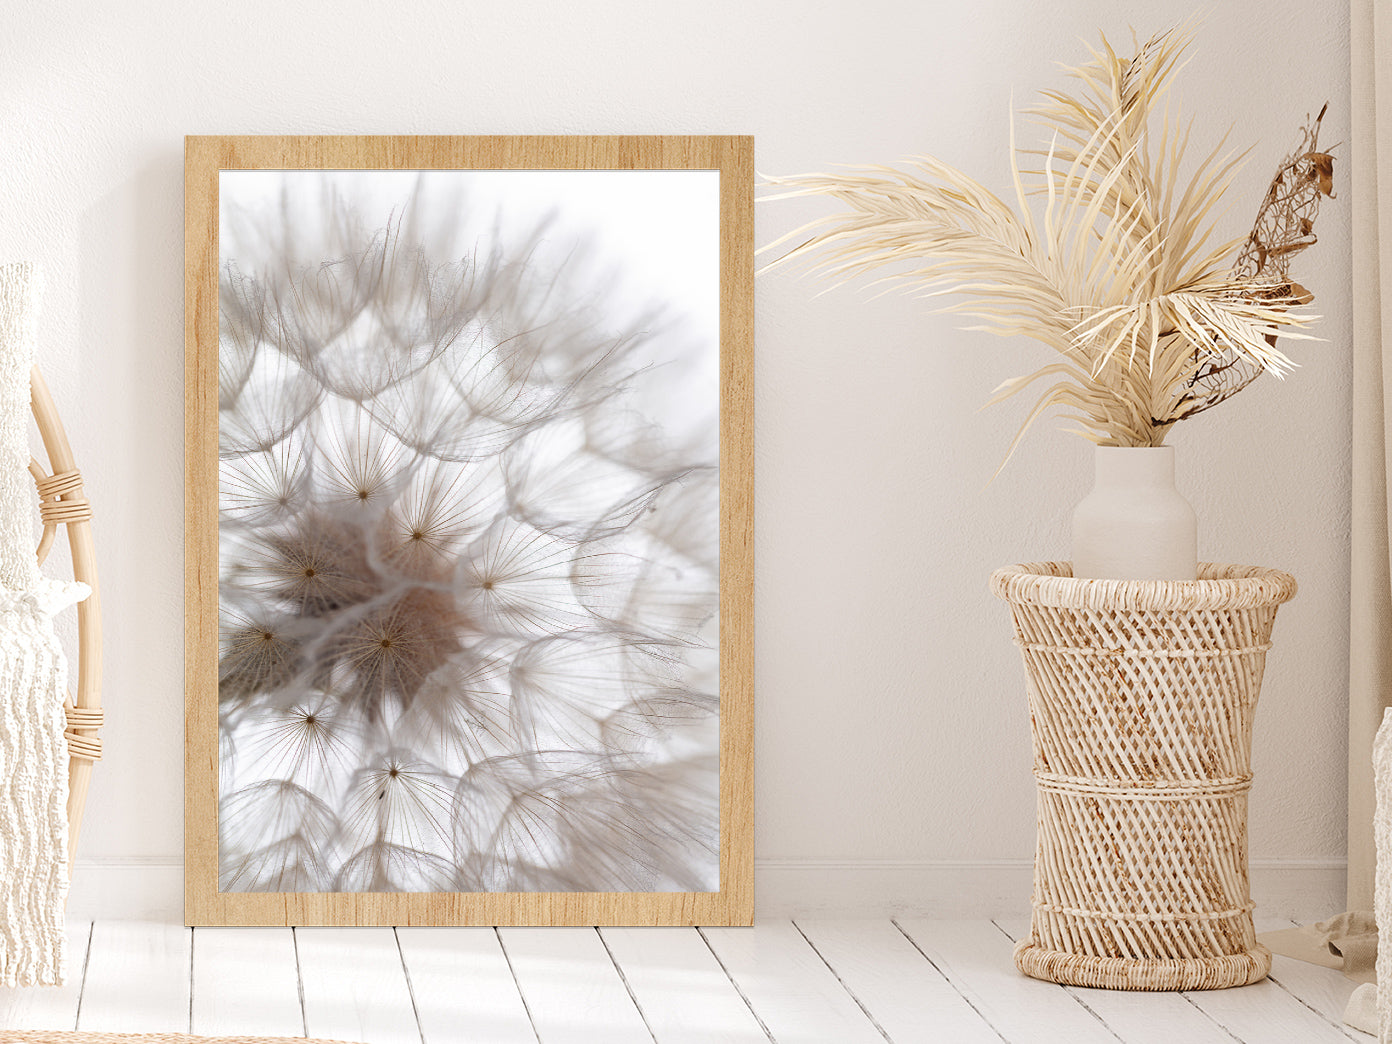 Dandelion Macro Flower Abstract Glass Framed Wall Art, Ready to Hang Quality Print Without White Border Oak